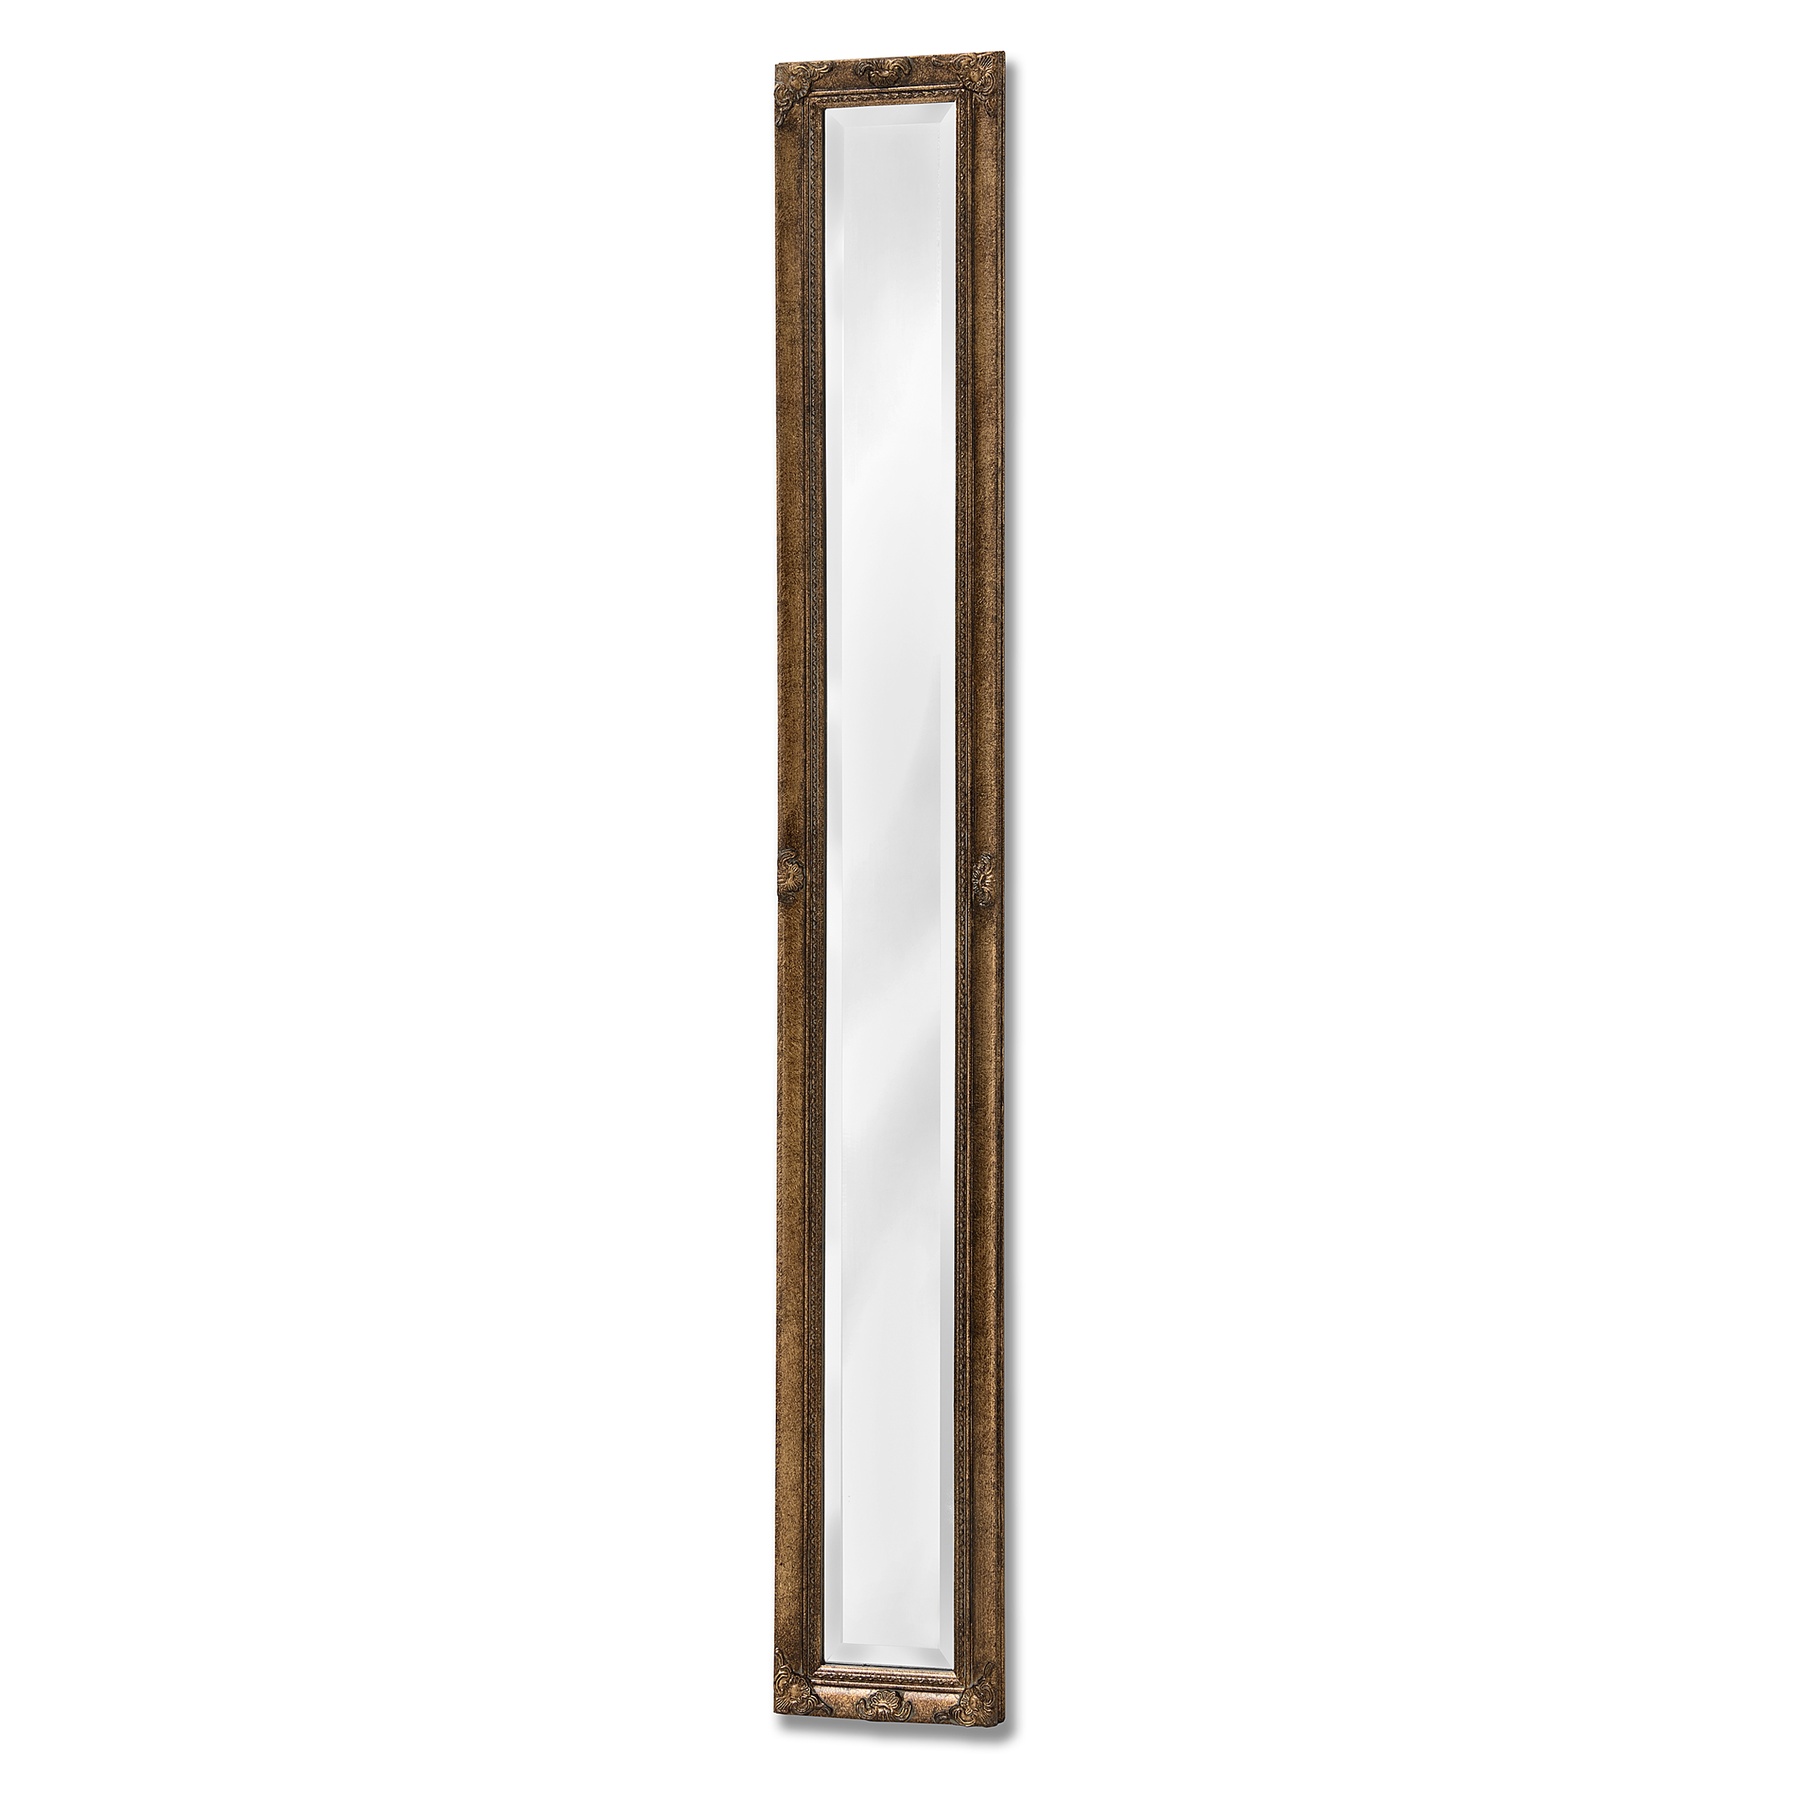 Antique gold, narrow gilded wall mirror | Wholesale by Hill Interiors